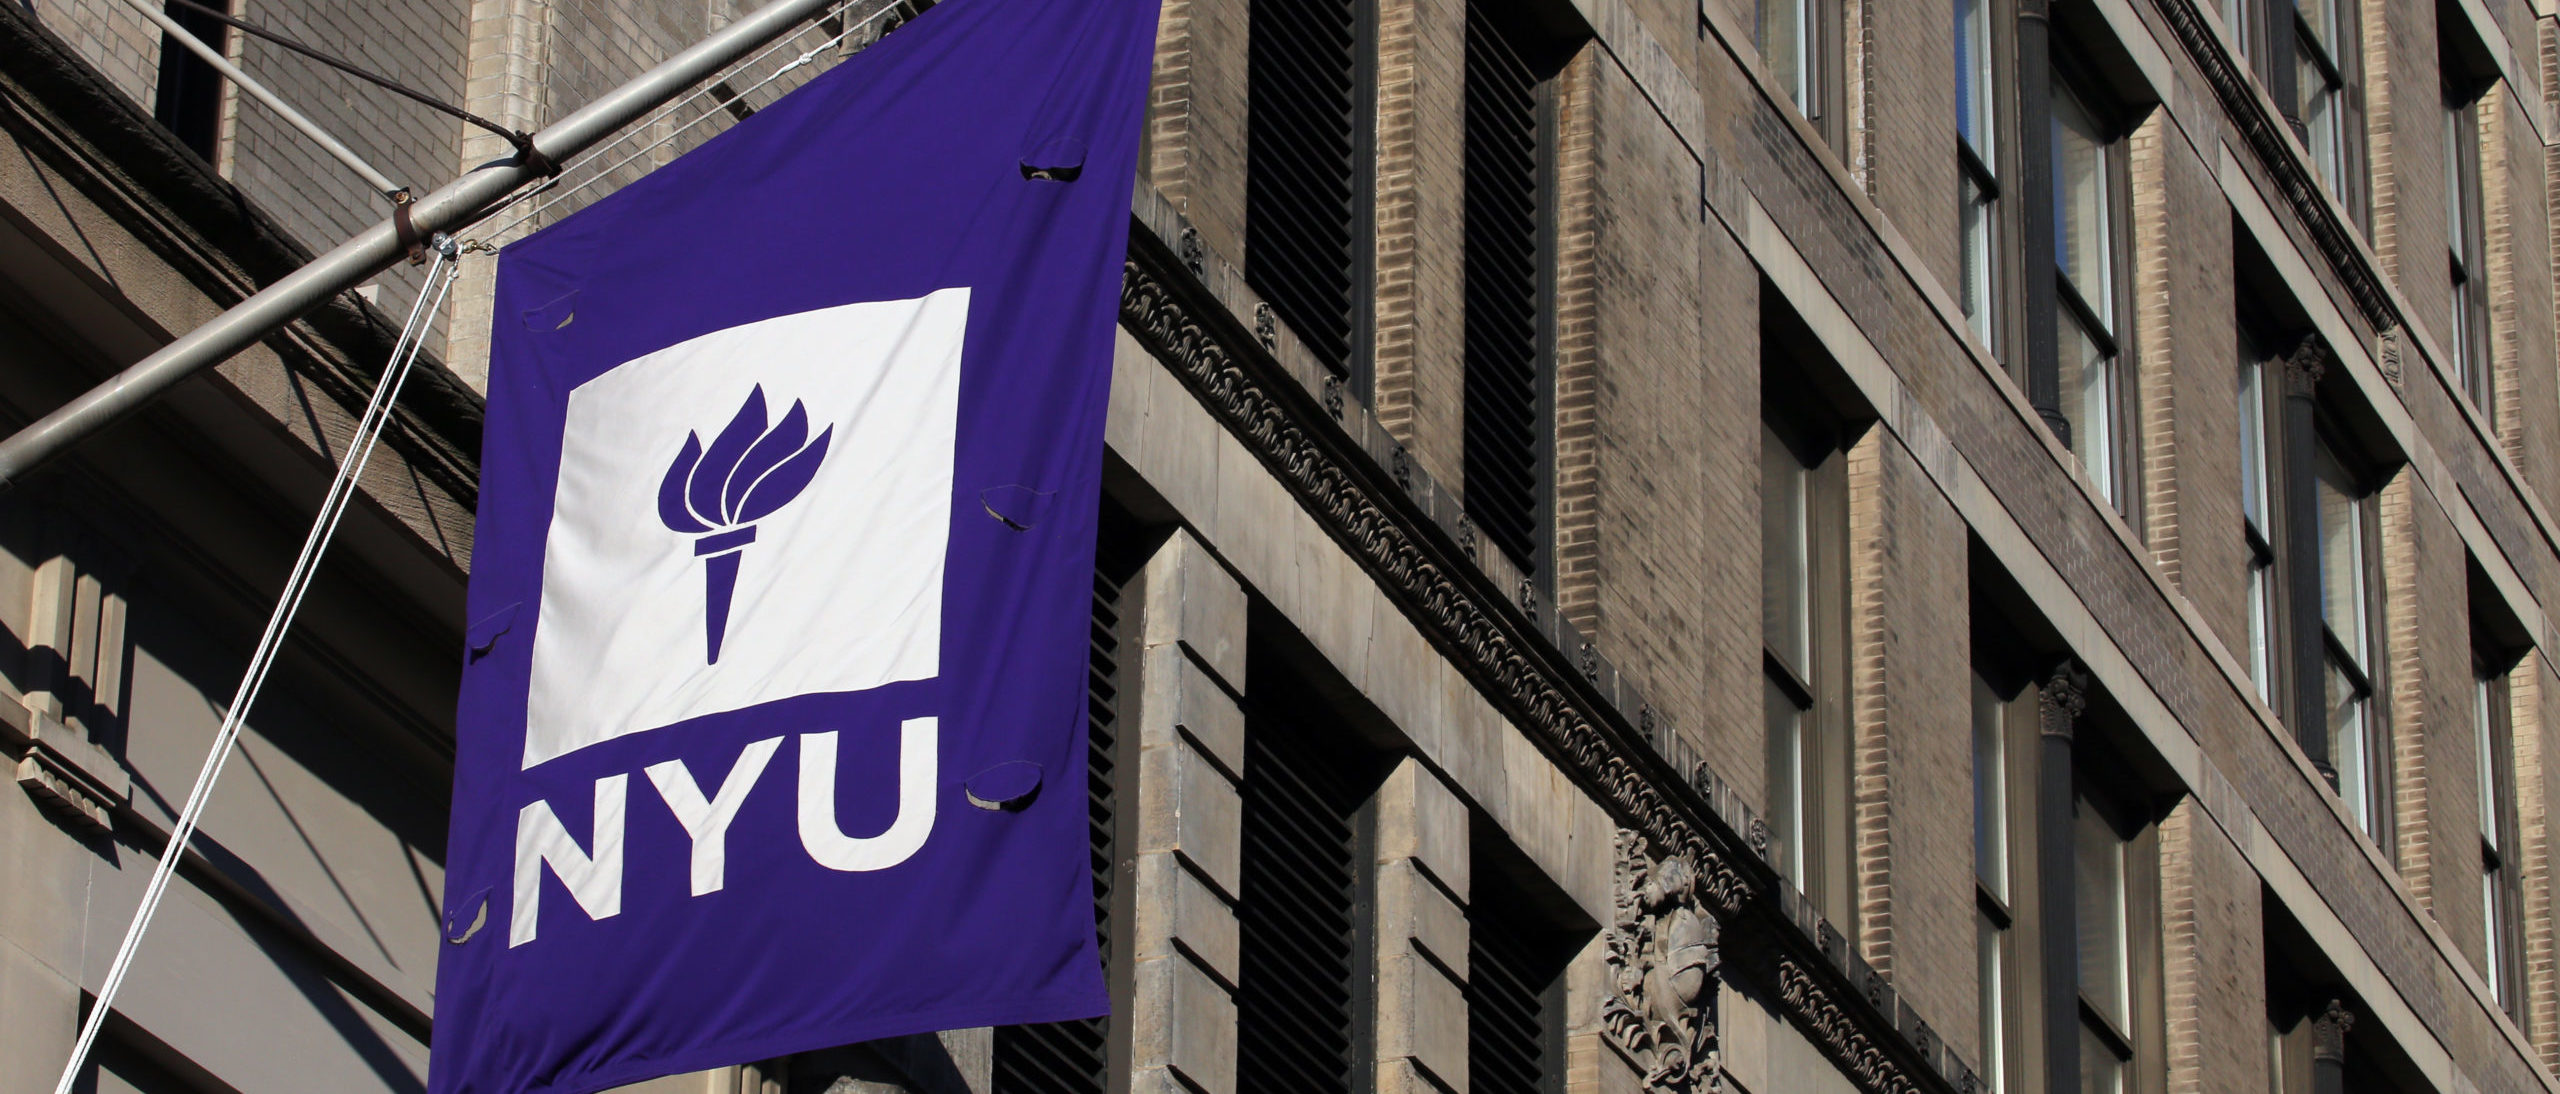 NYU Denies Claims It’s Creating Race-Based Dorms | The Daily Caller